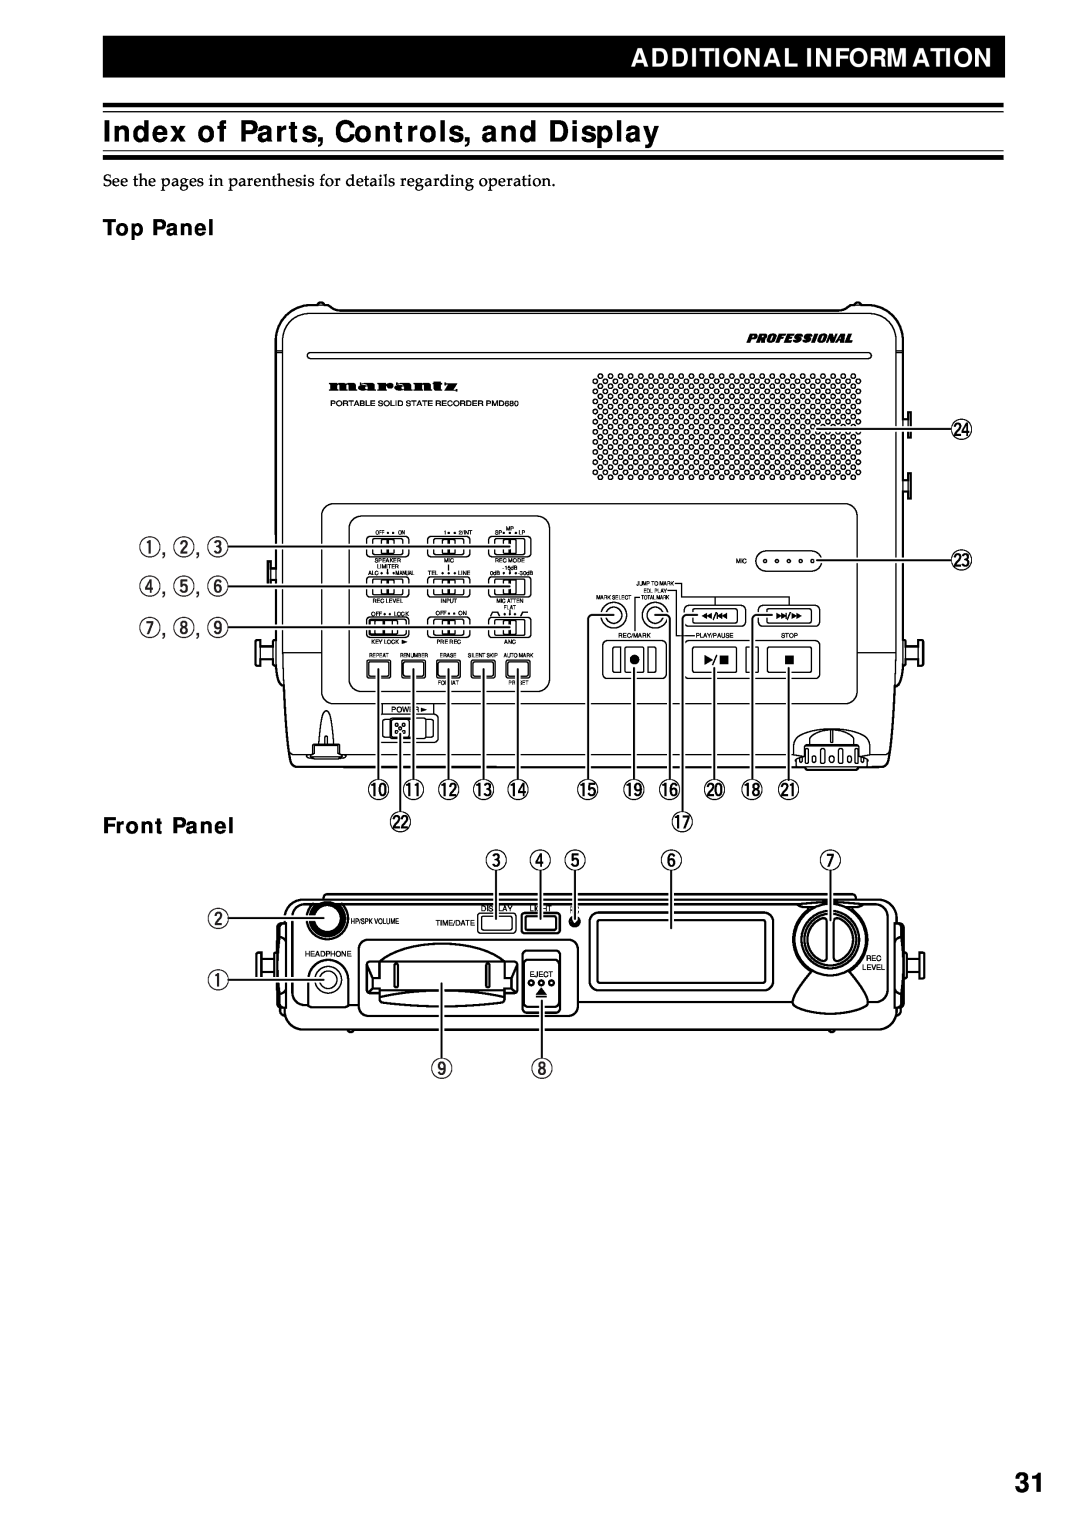 Marantz PMD680 manual Index of Parts, Controls, and Display, Additional Information, Top Panel, Front Panel 